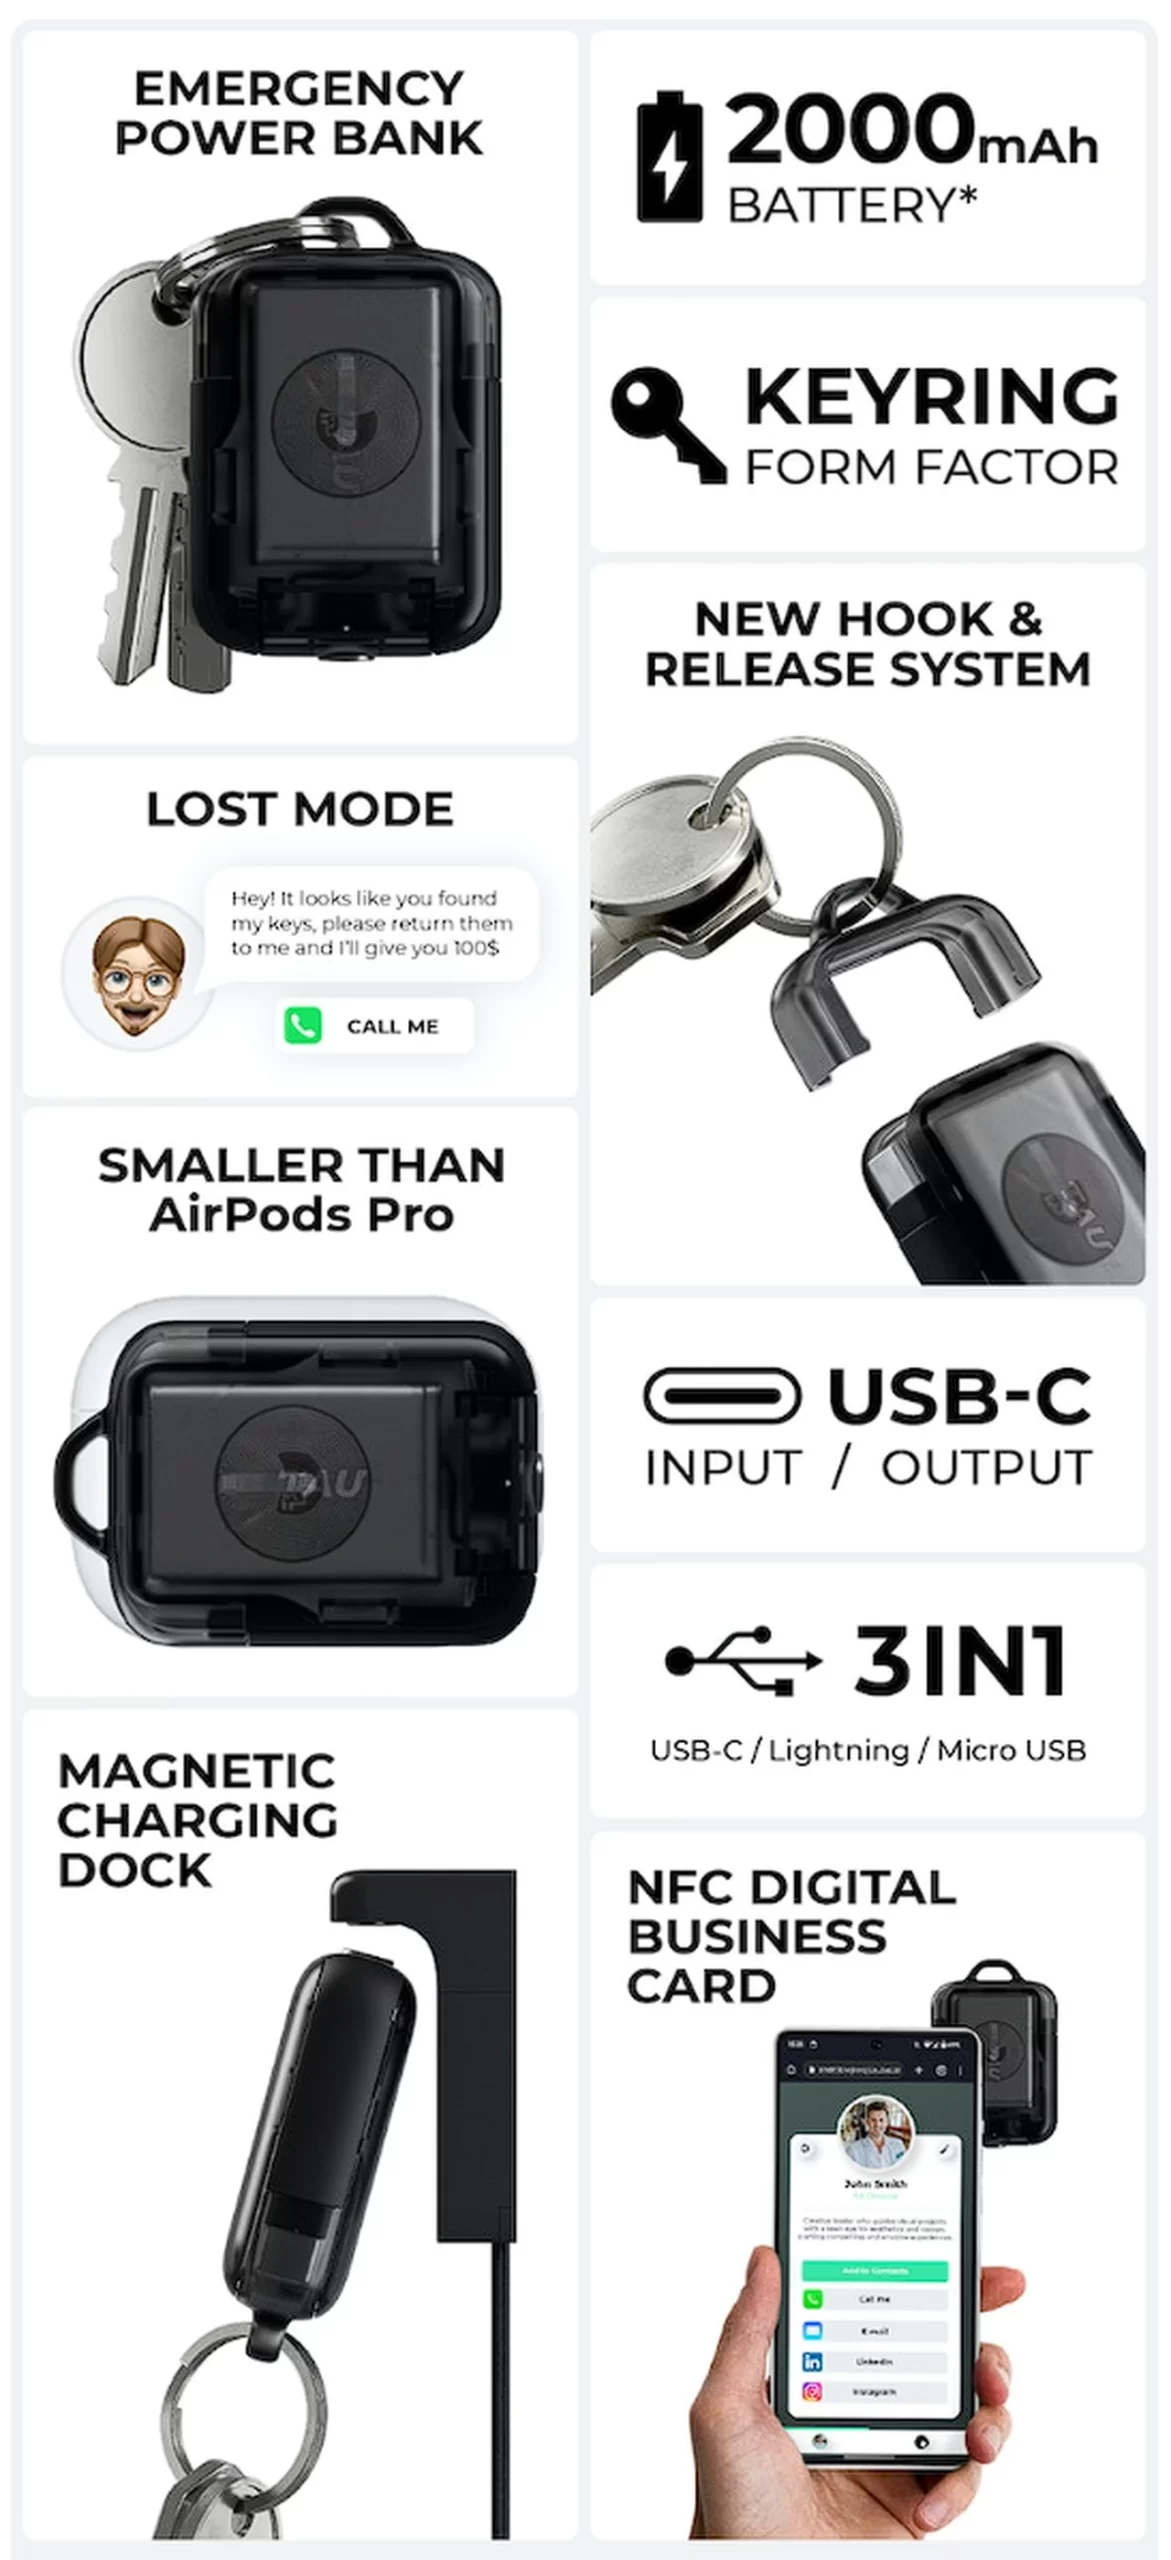 TAU 2 pocket power bank features